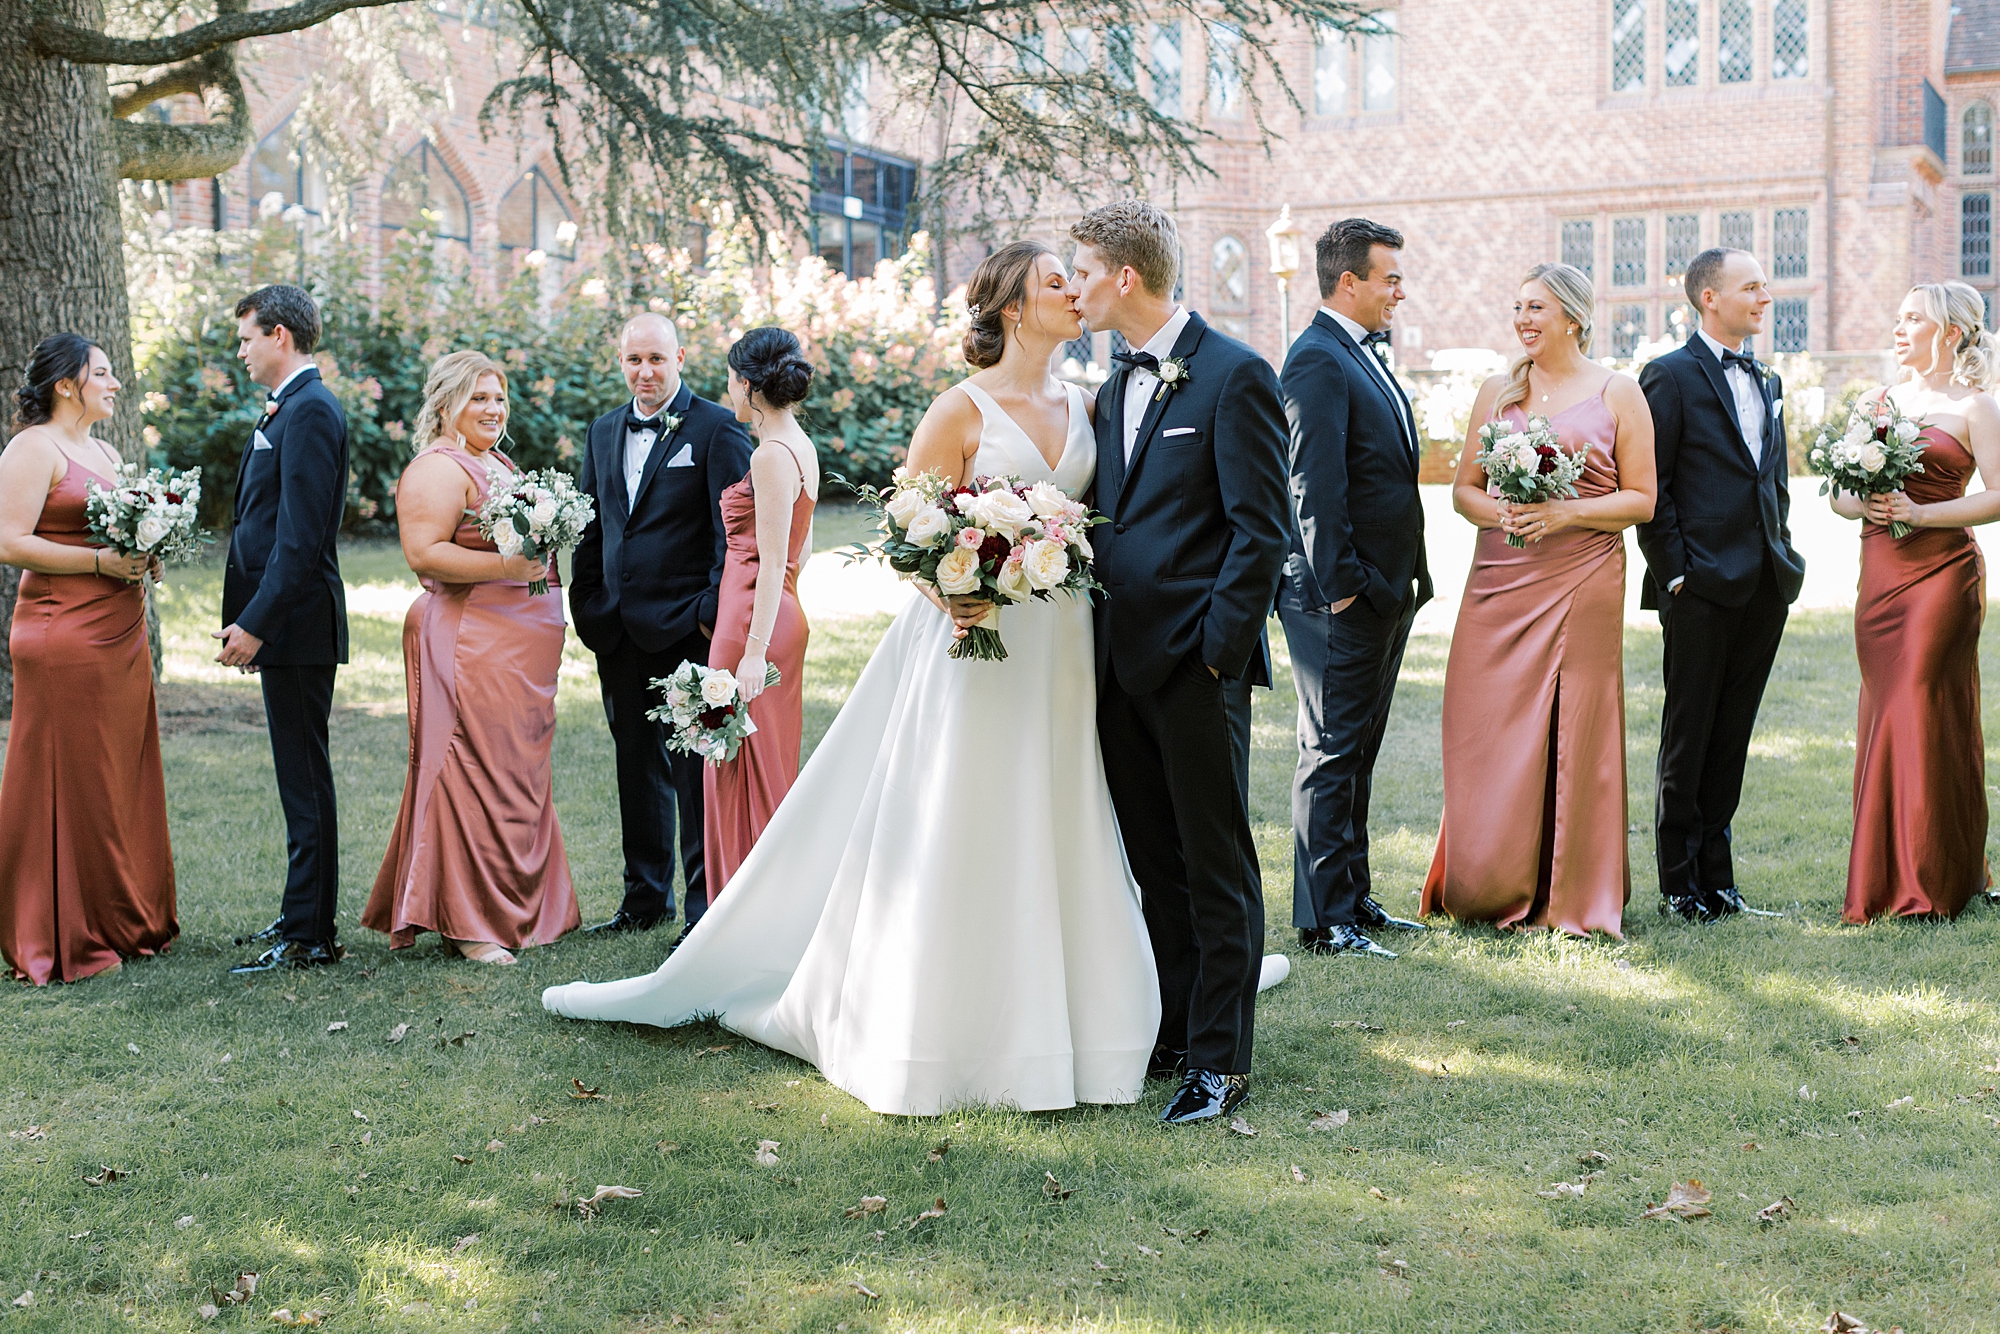 bride and groom kiss with wedding party around them in burnt orange gowns and black suits 